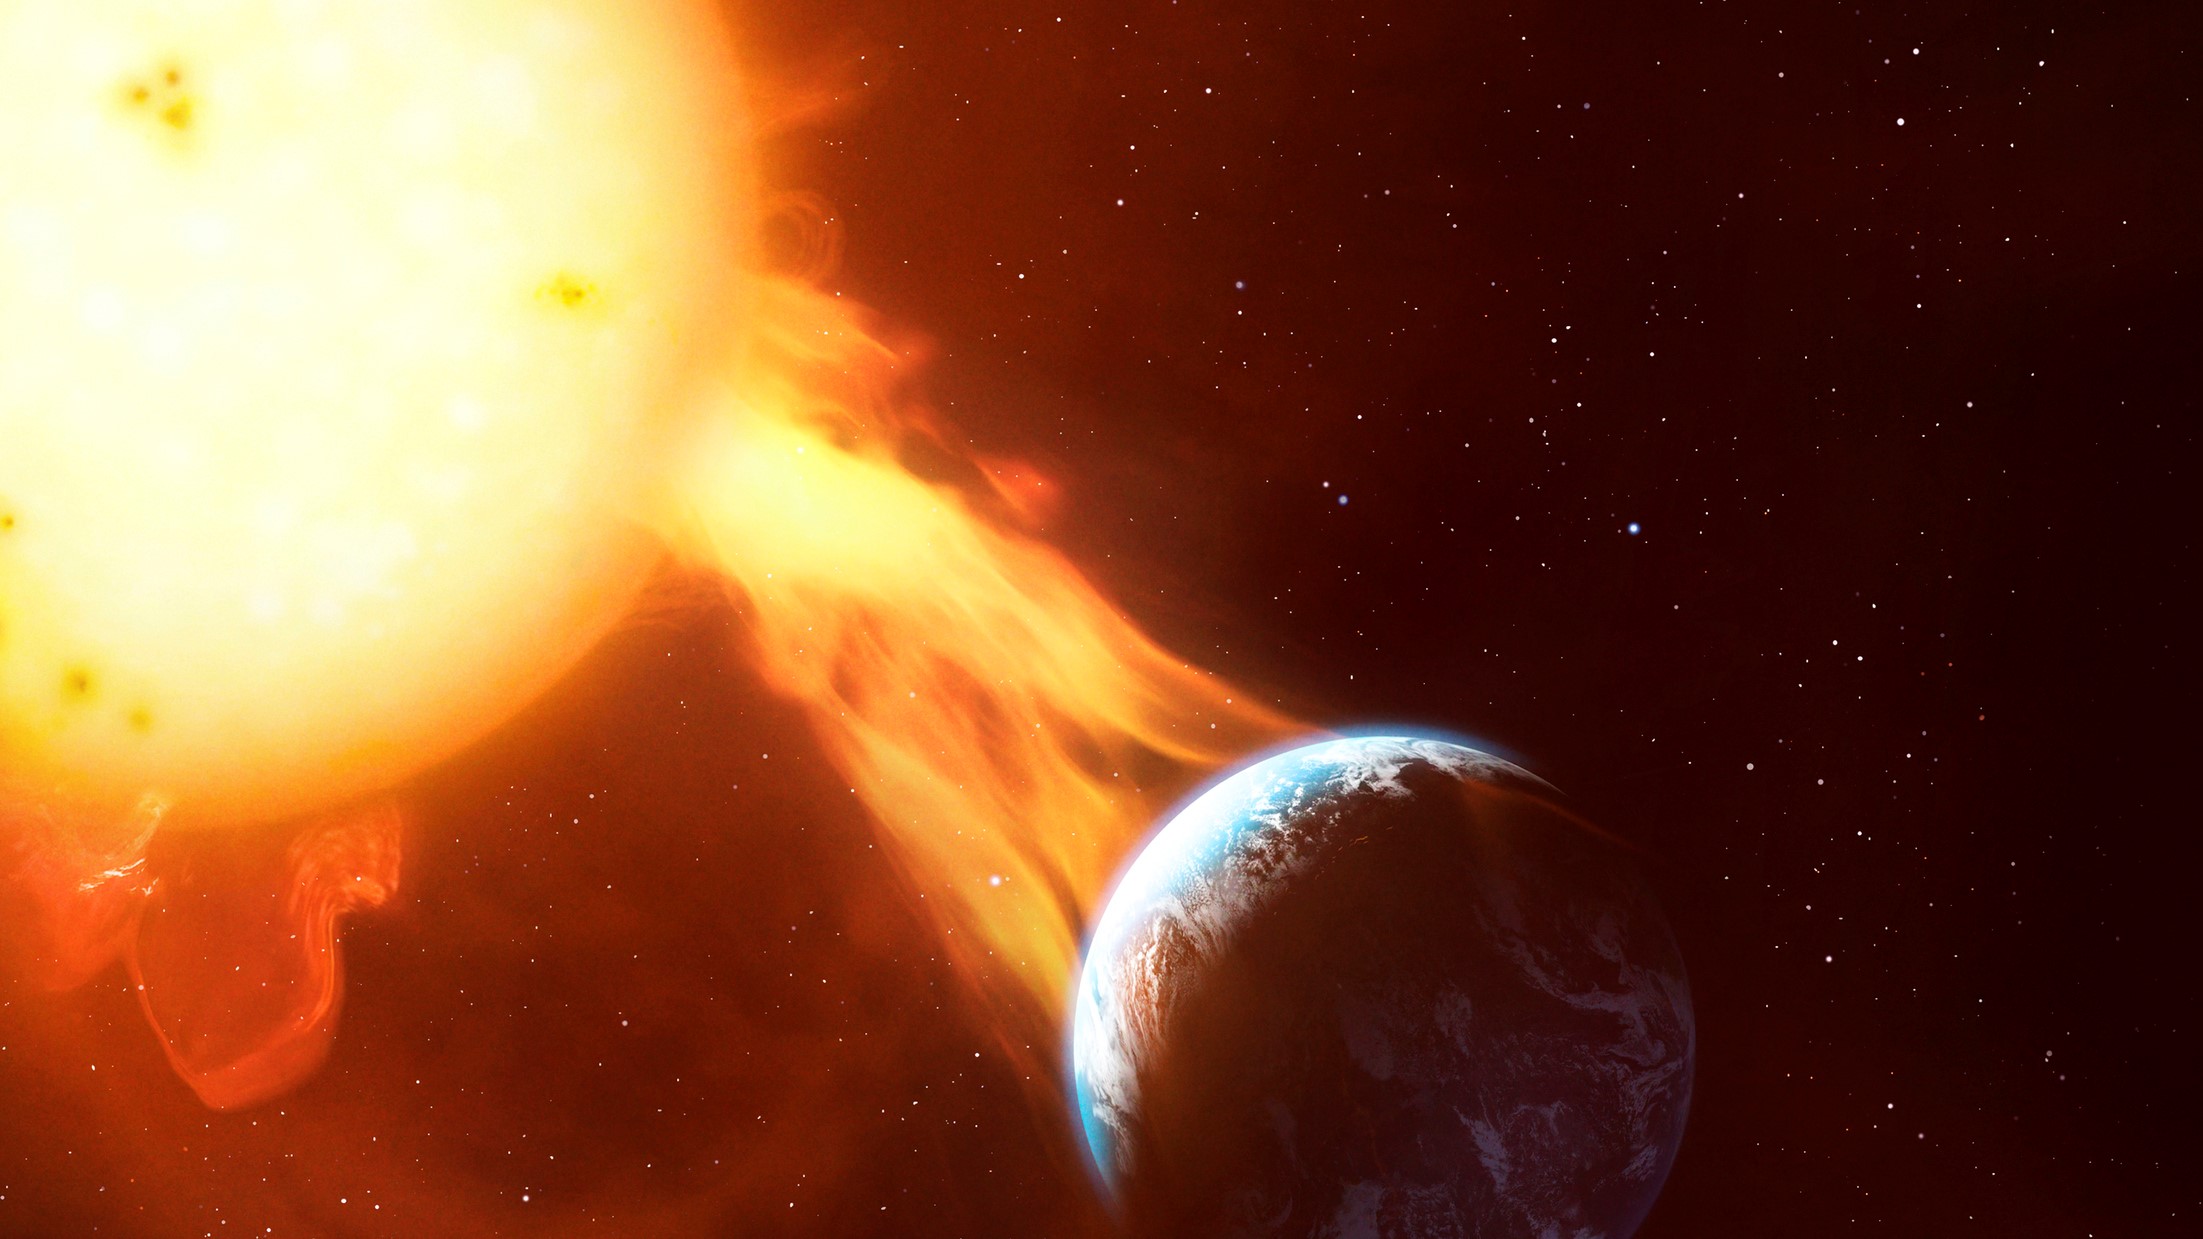 A large fiery flare from the sun is hitting Earth.